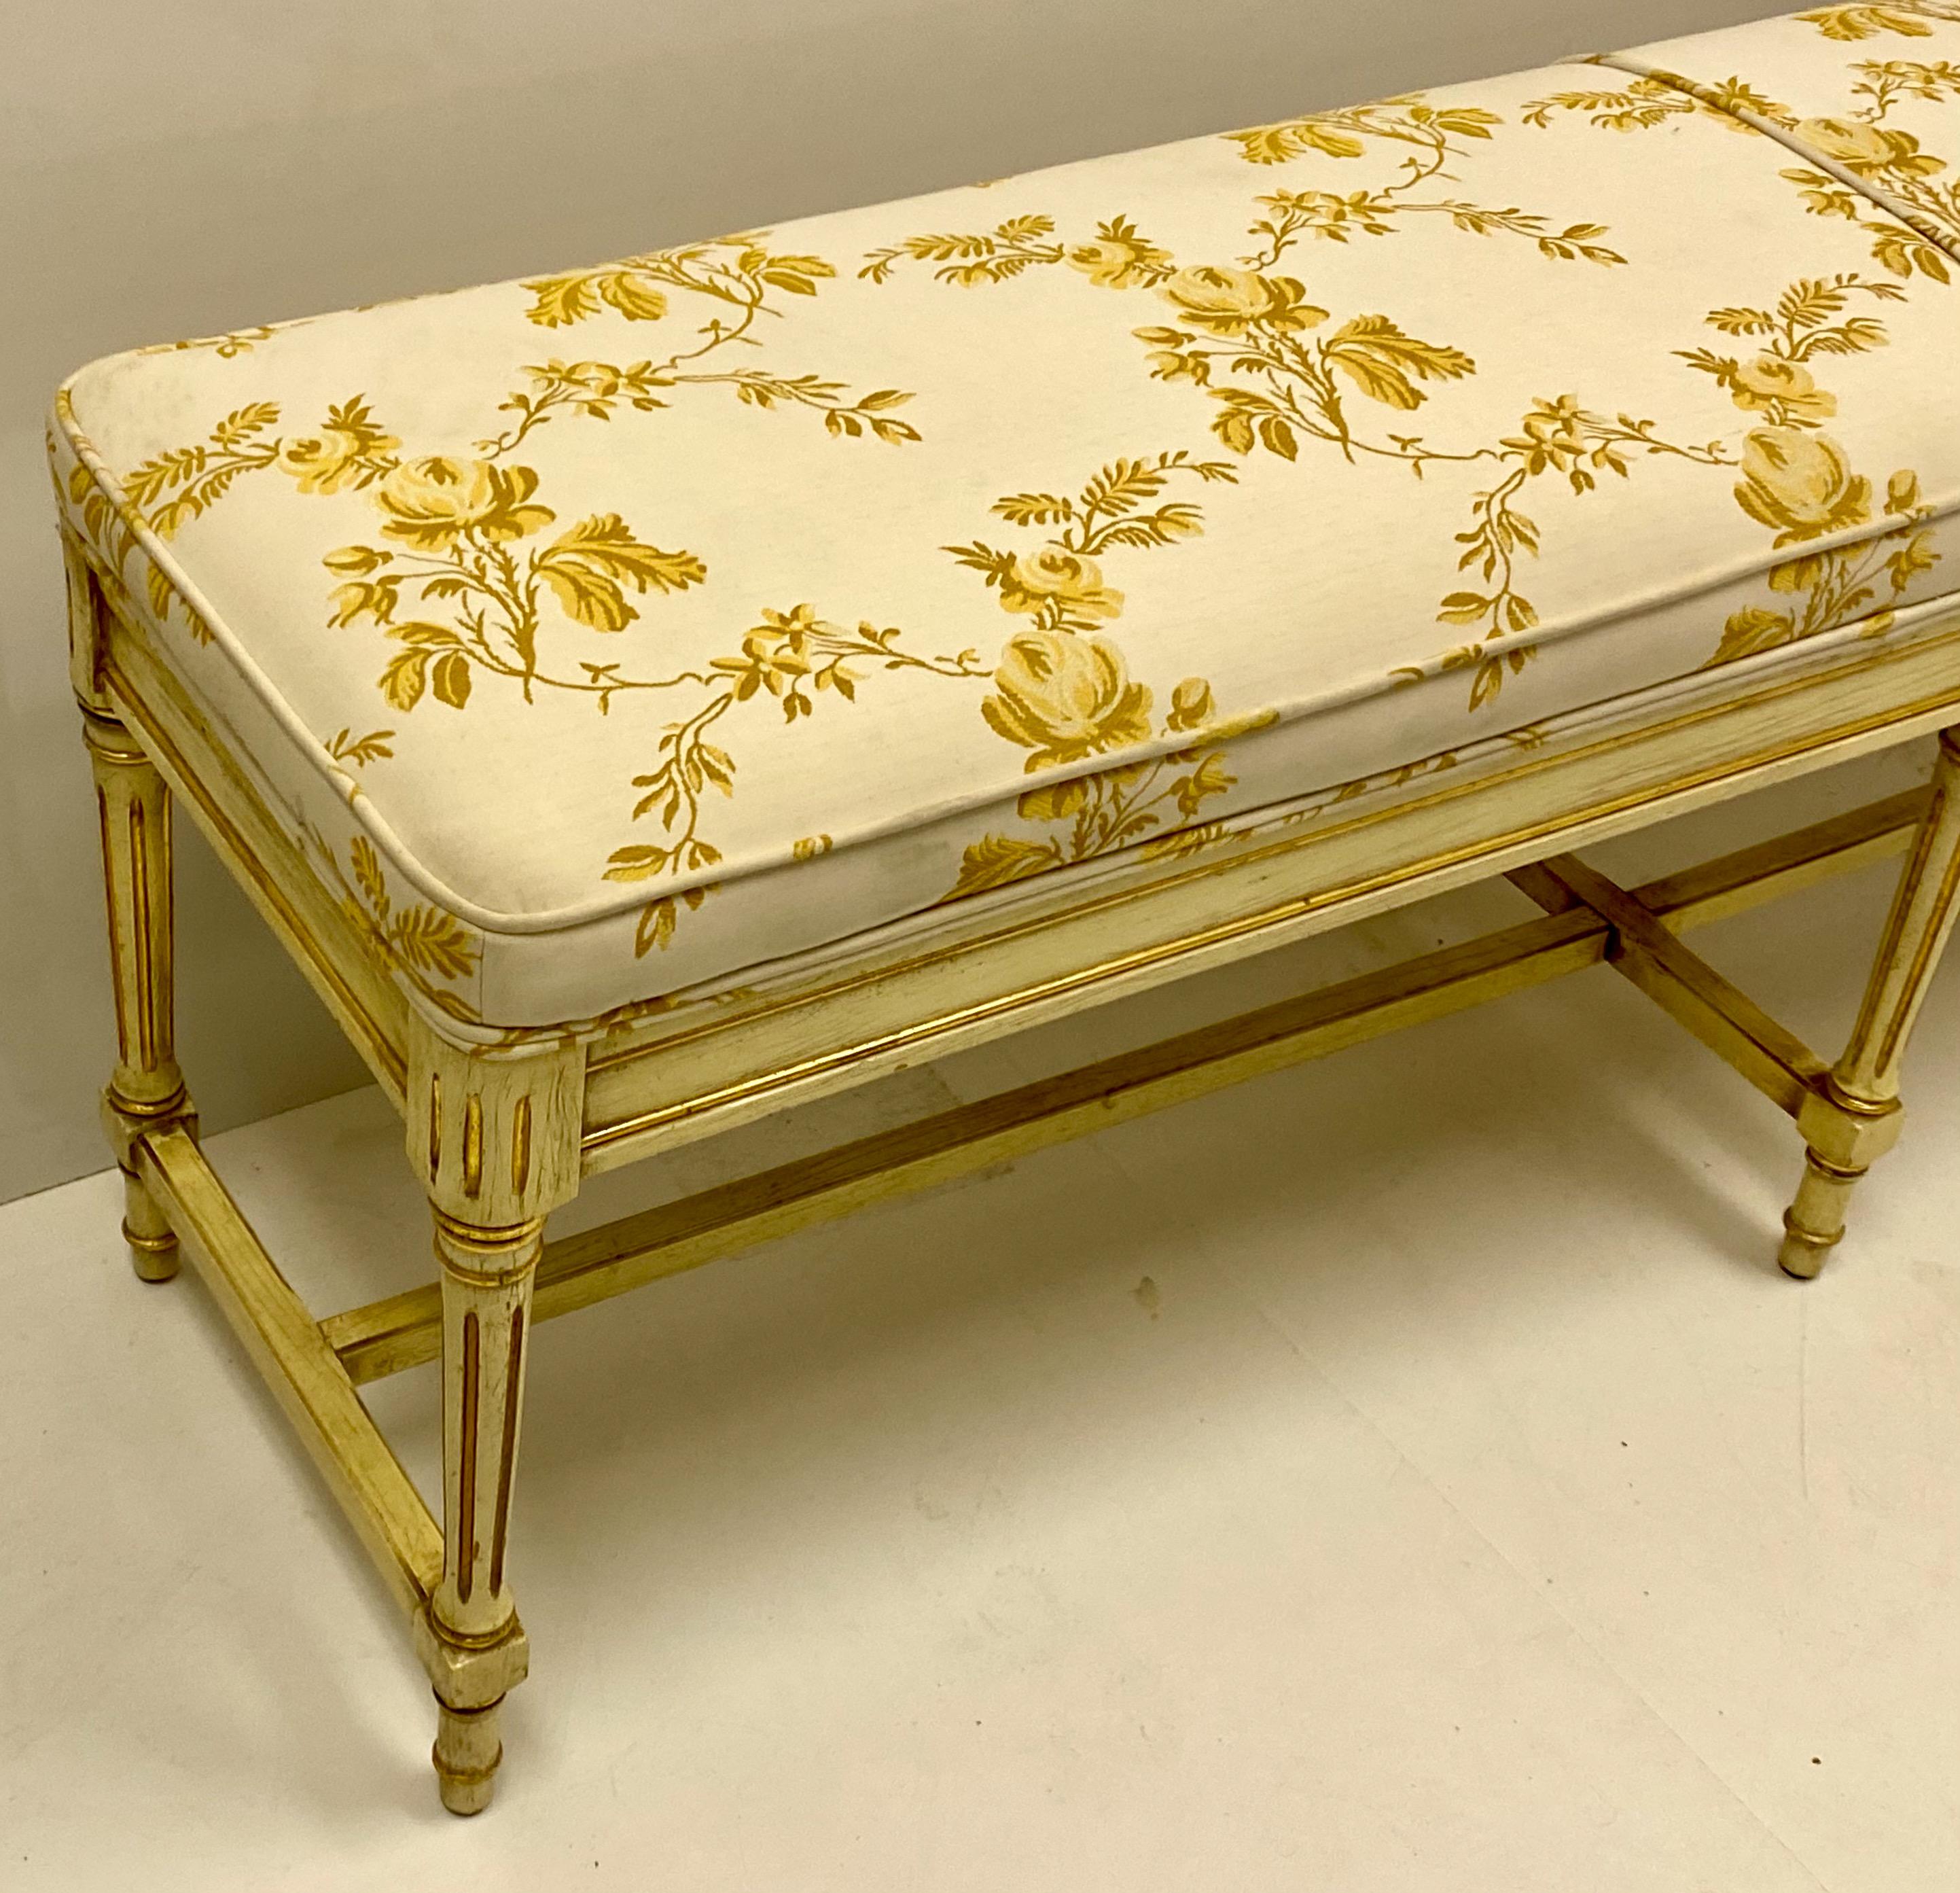 This is a midcentury French upholstered bench by Claude Moulin. The fabric is original and shows mild wear. The painted frame is a warm butter ivory. It is marked in two places.